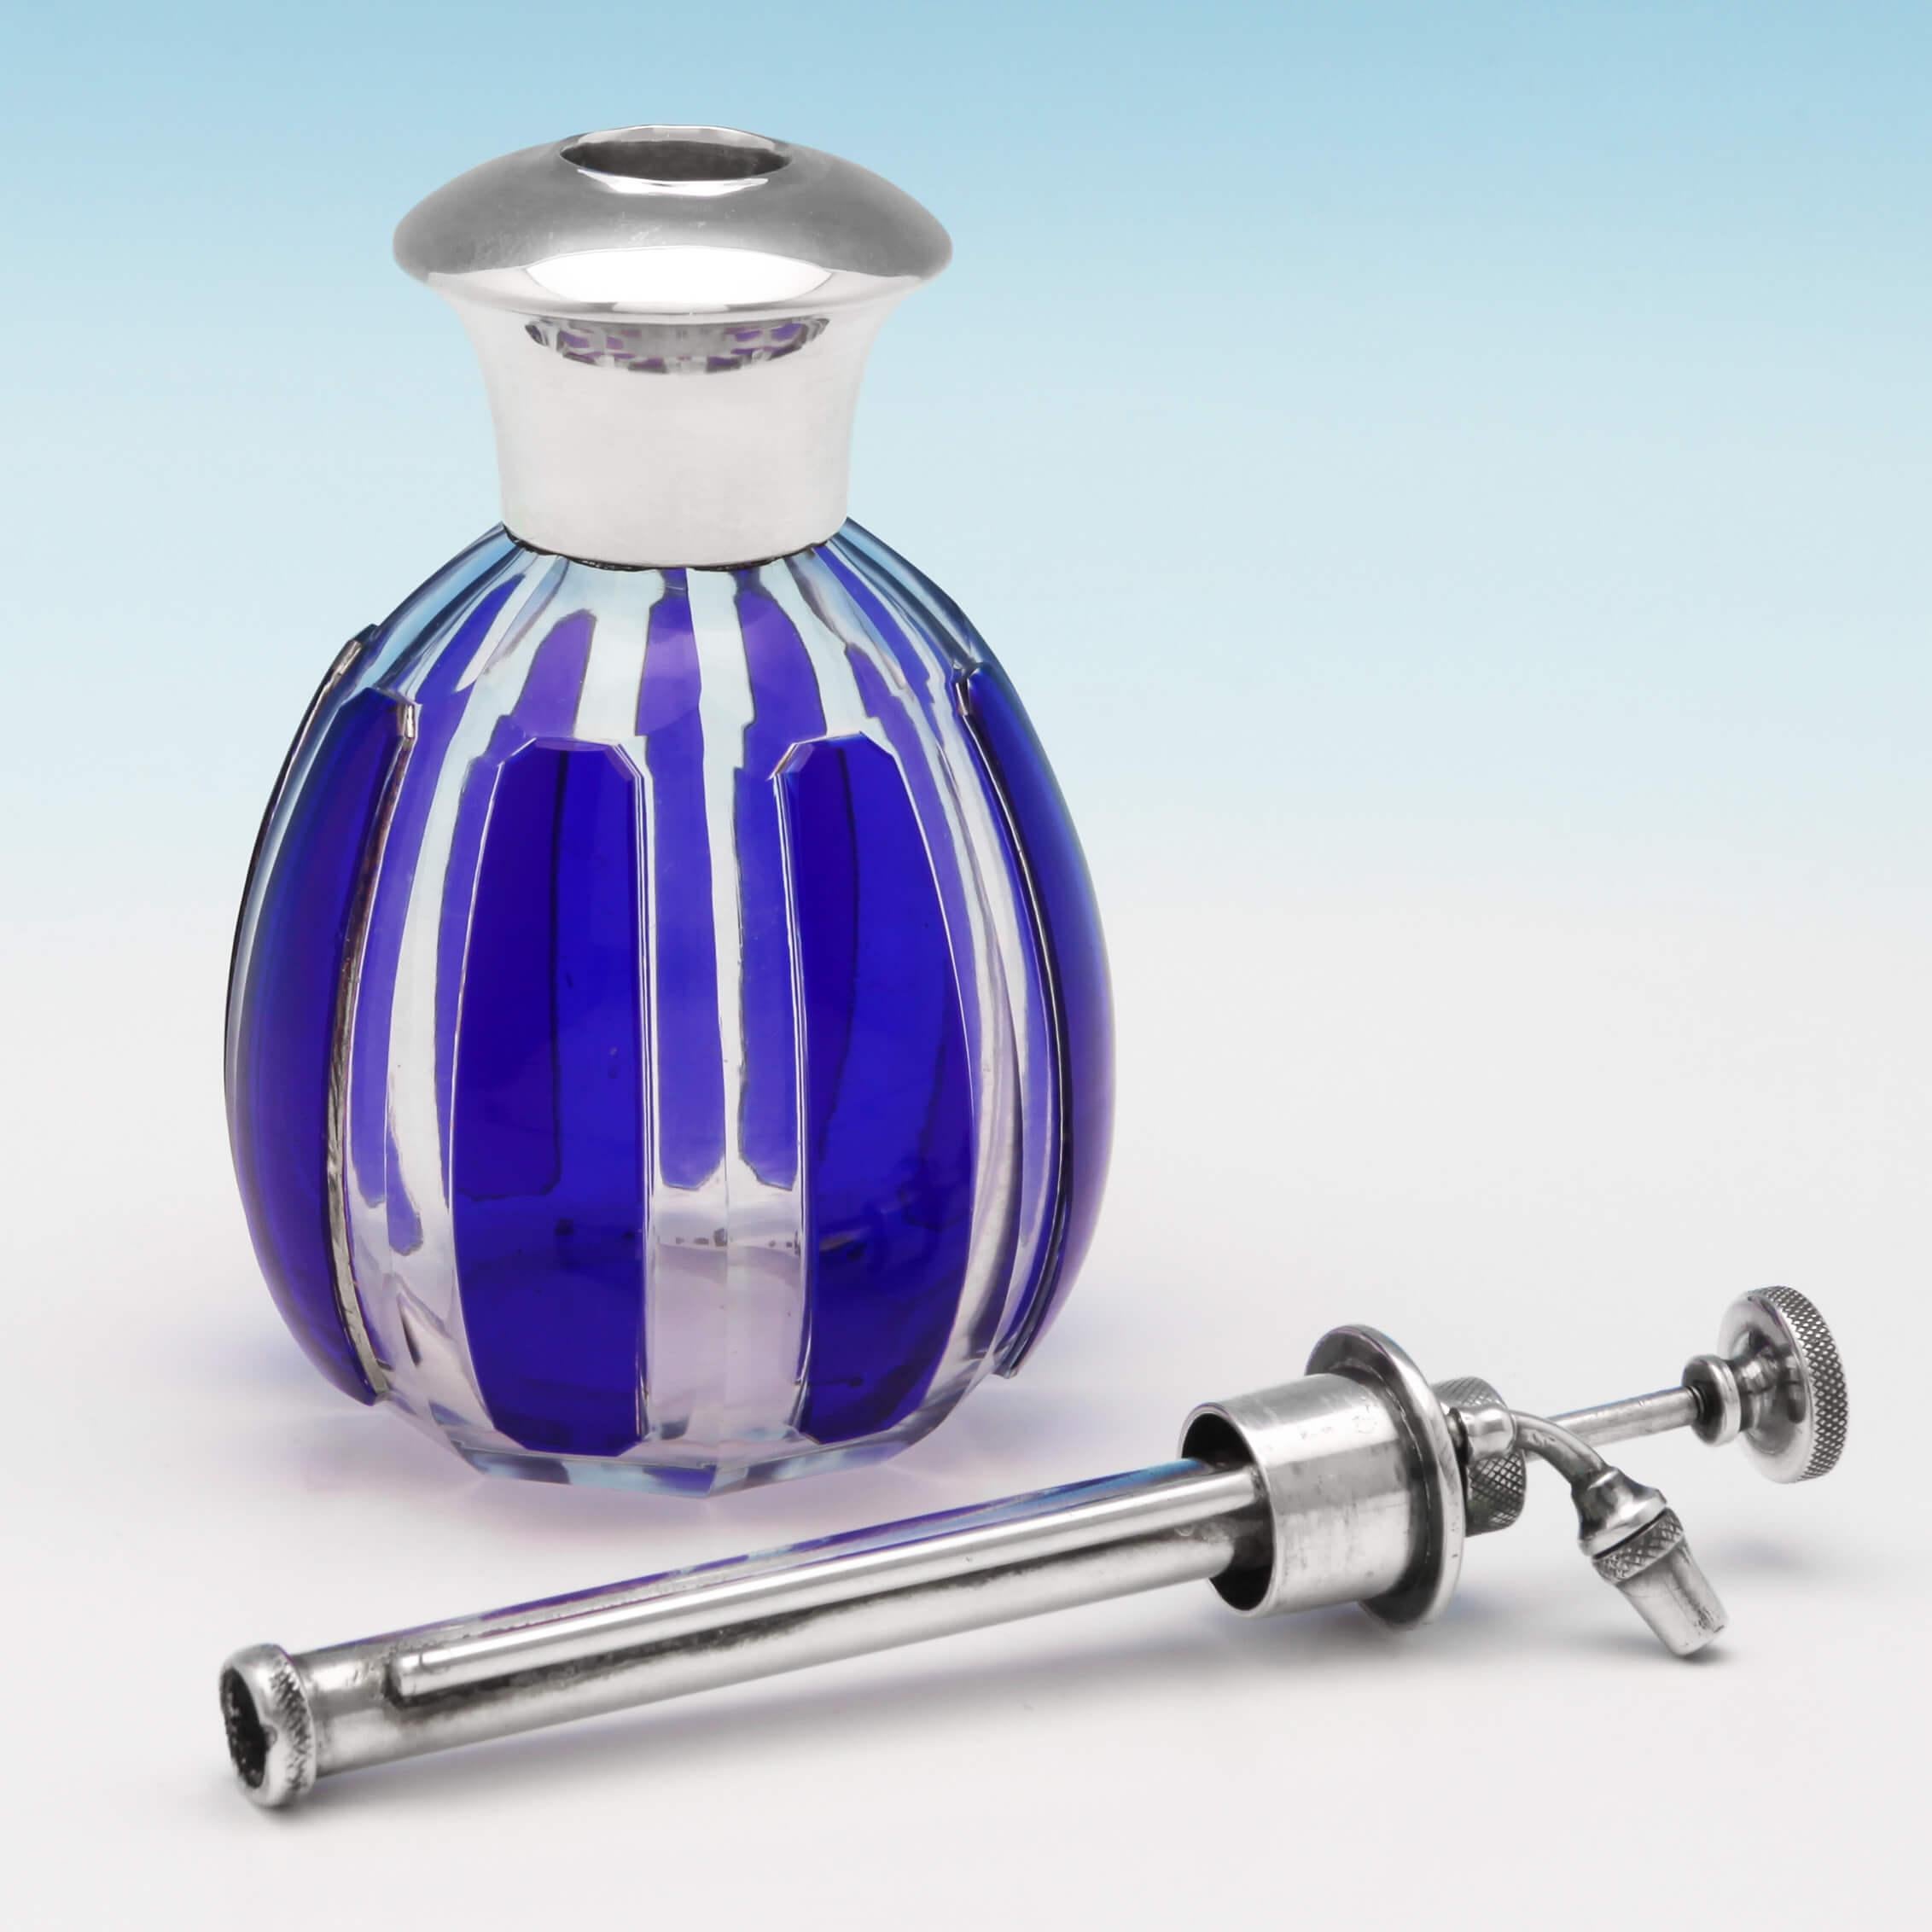 Hallmarked in Birmingham in 1925 by Charles S. Green & Co., this rare, George V, sterling silver atomiser, is in the Art Deco style, and has a clear glass body with overlaid blue panels. The atomiser measures 6